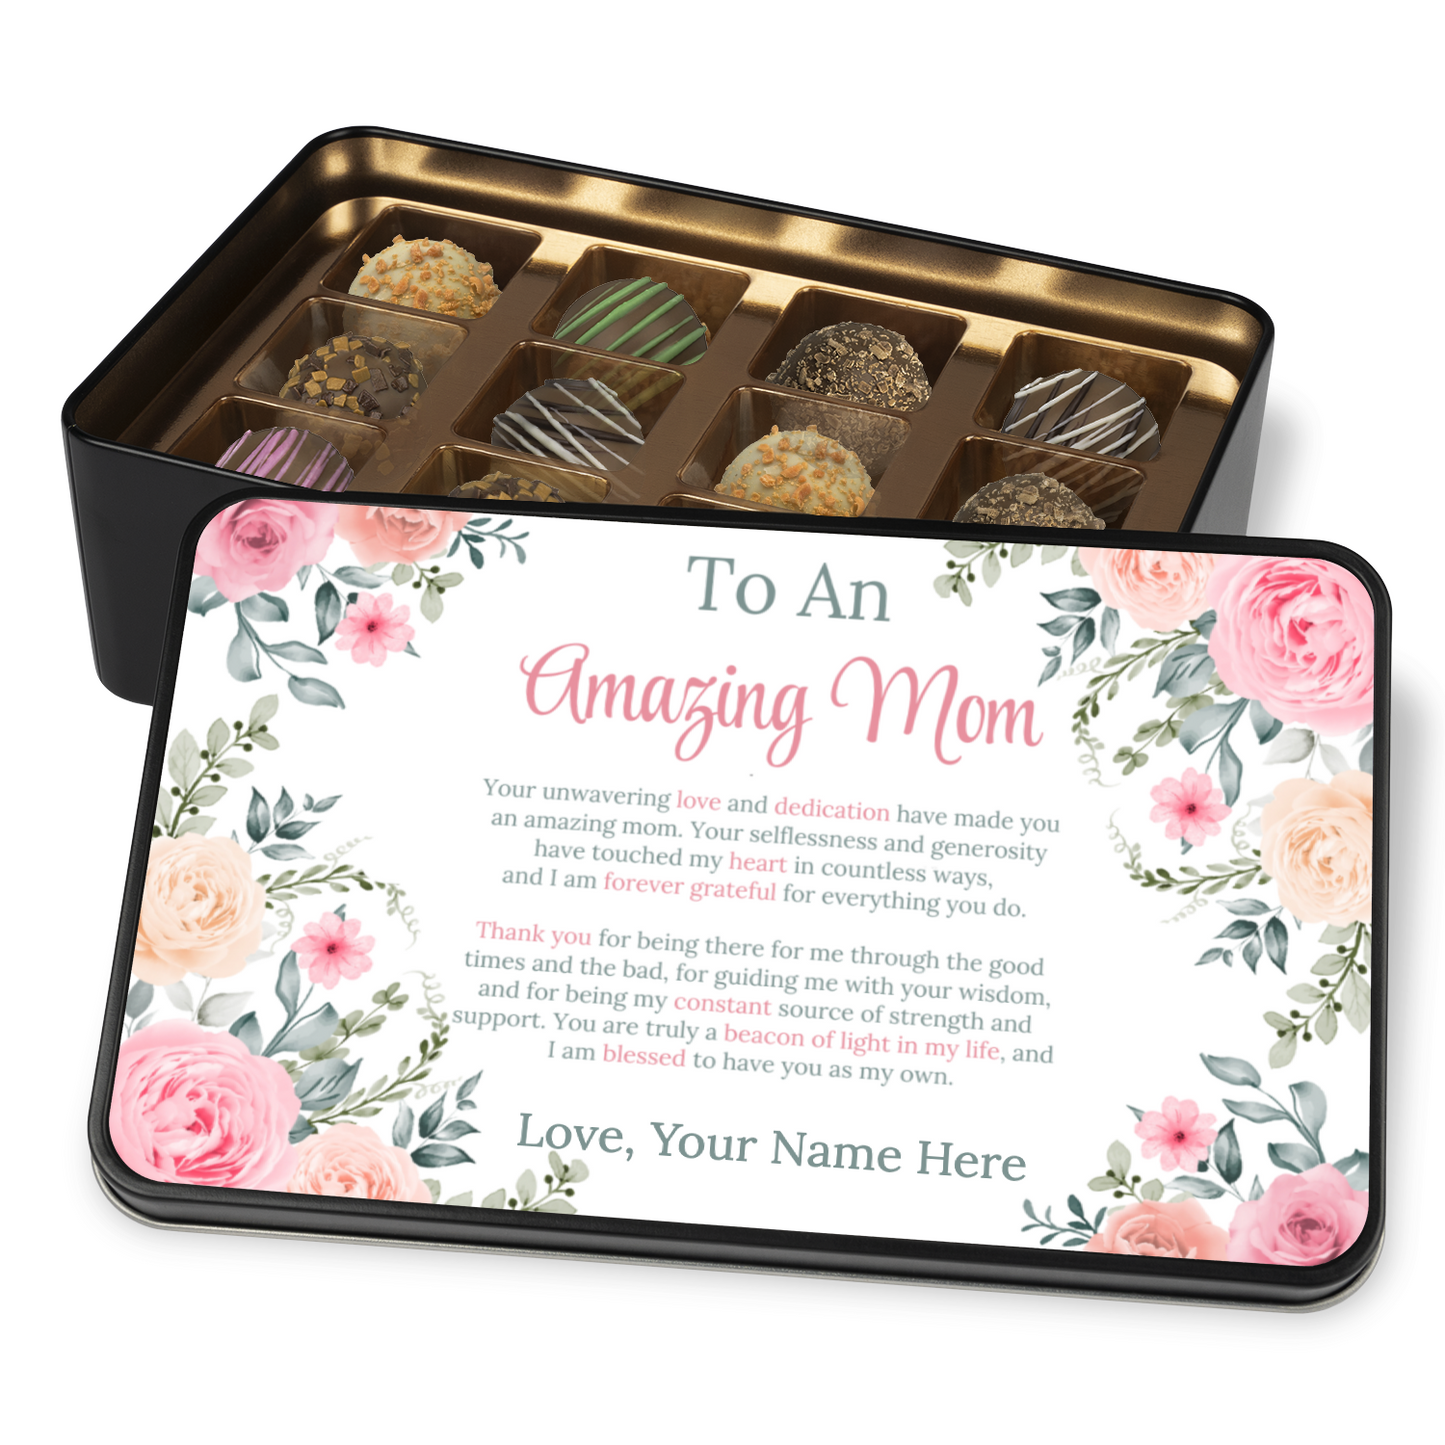 Personalized Luxury Chocolate Truffles in Keepsake Tin - Amazing Mom - Gift for Mom - Mothers Day Gift - Birthday Gift for Mom